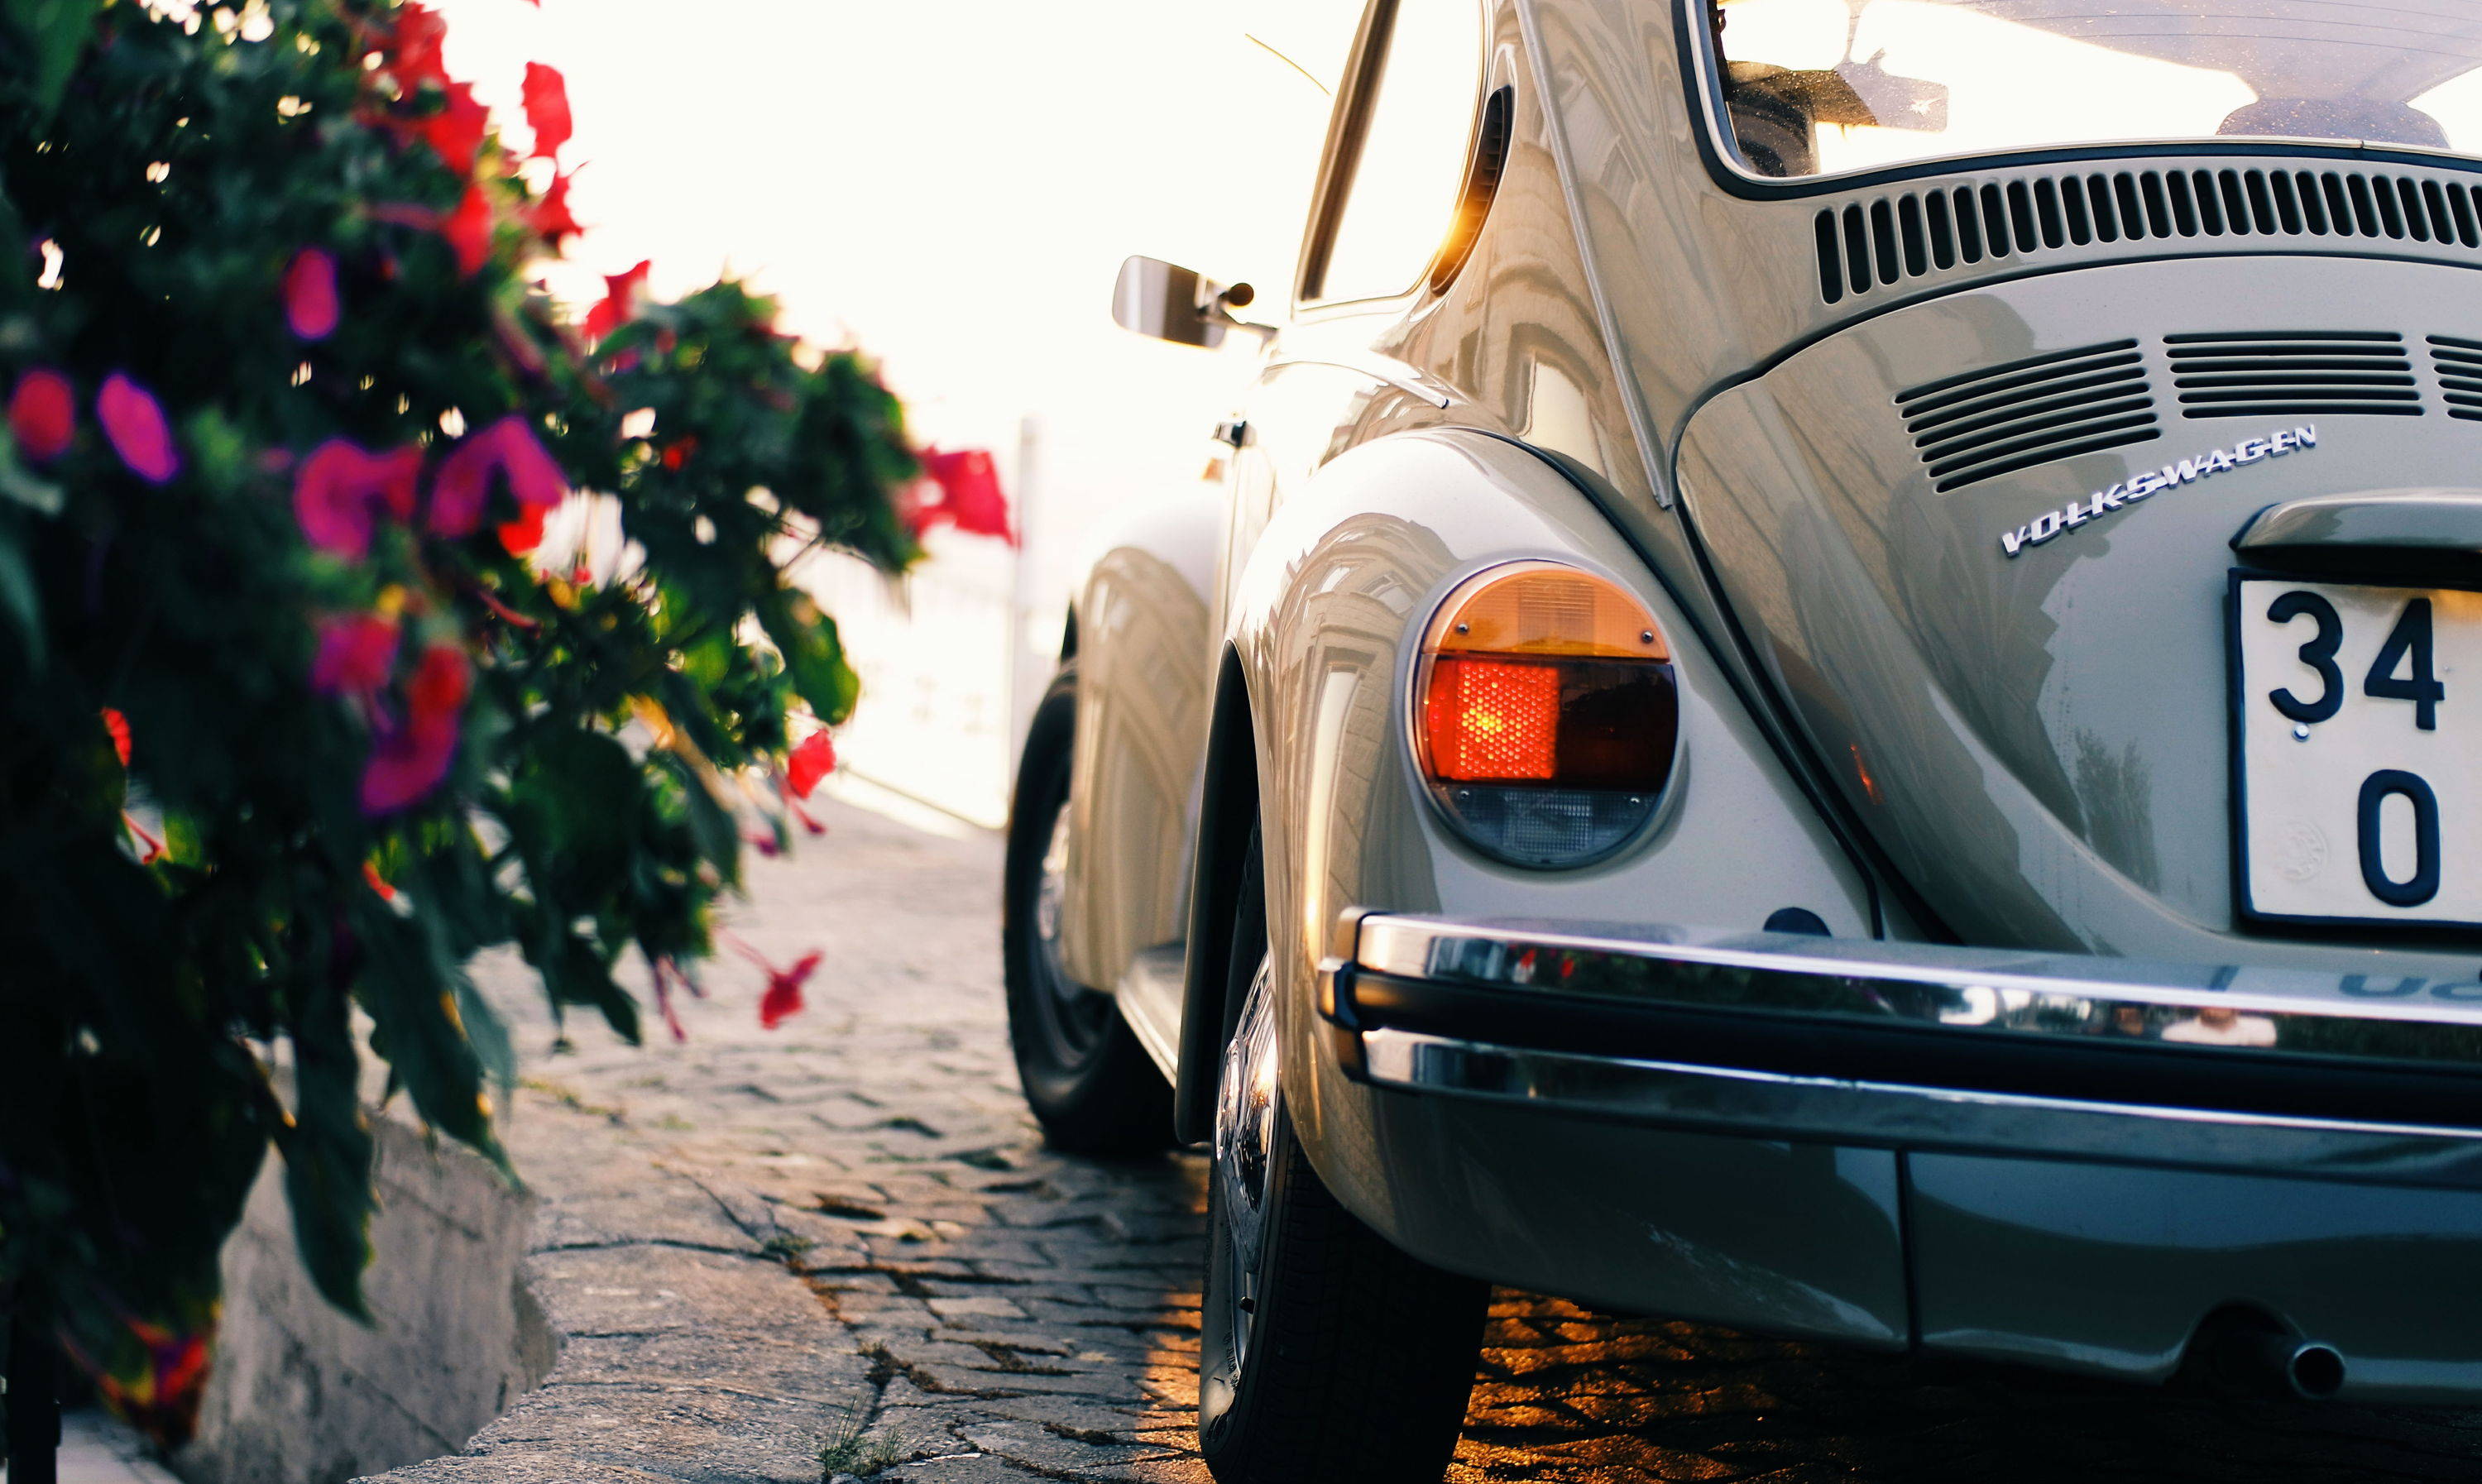 vintage car and flowers